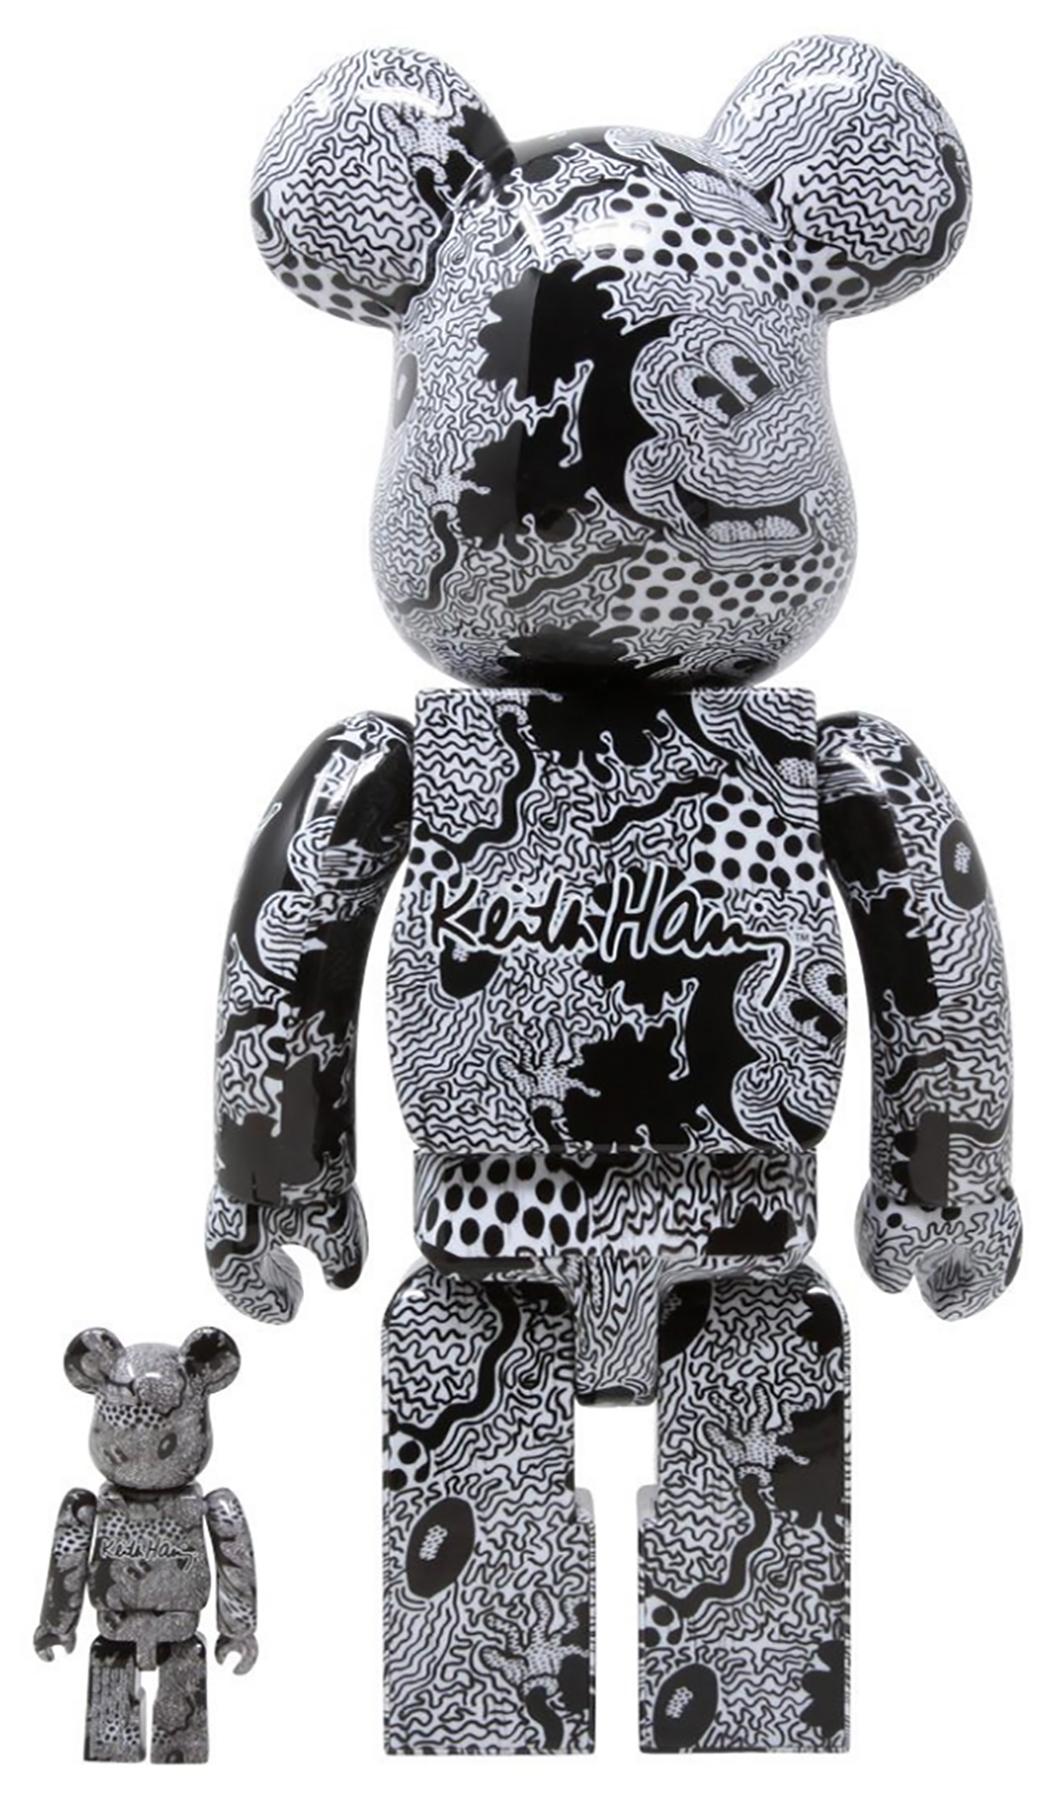 Keith Haring Bearbrick figure 400 % (Haring Mickey Mouse BE@RBRICK) - Contemporain Print par (after) Keith Haring